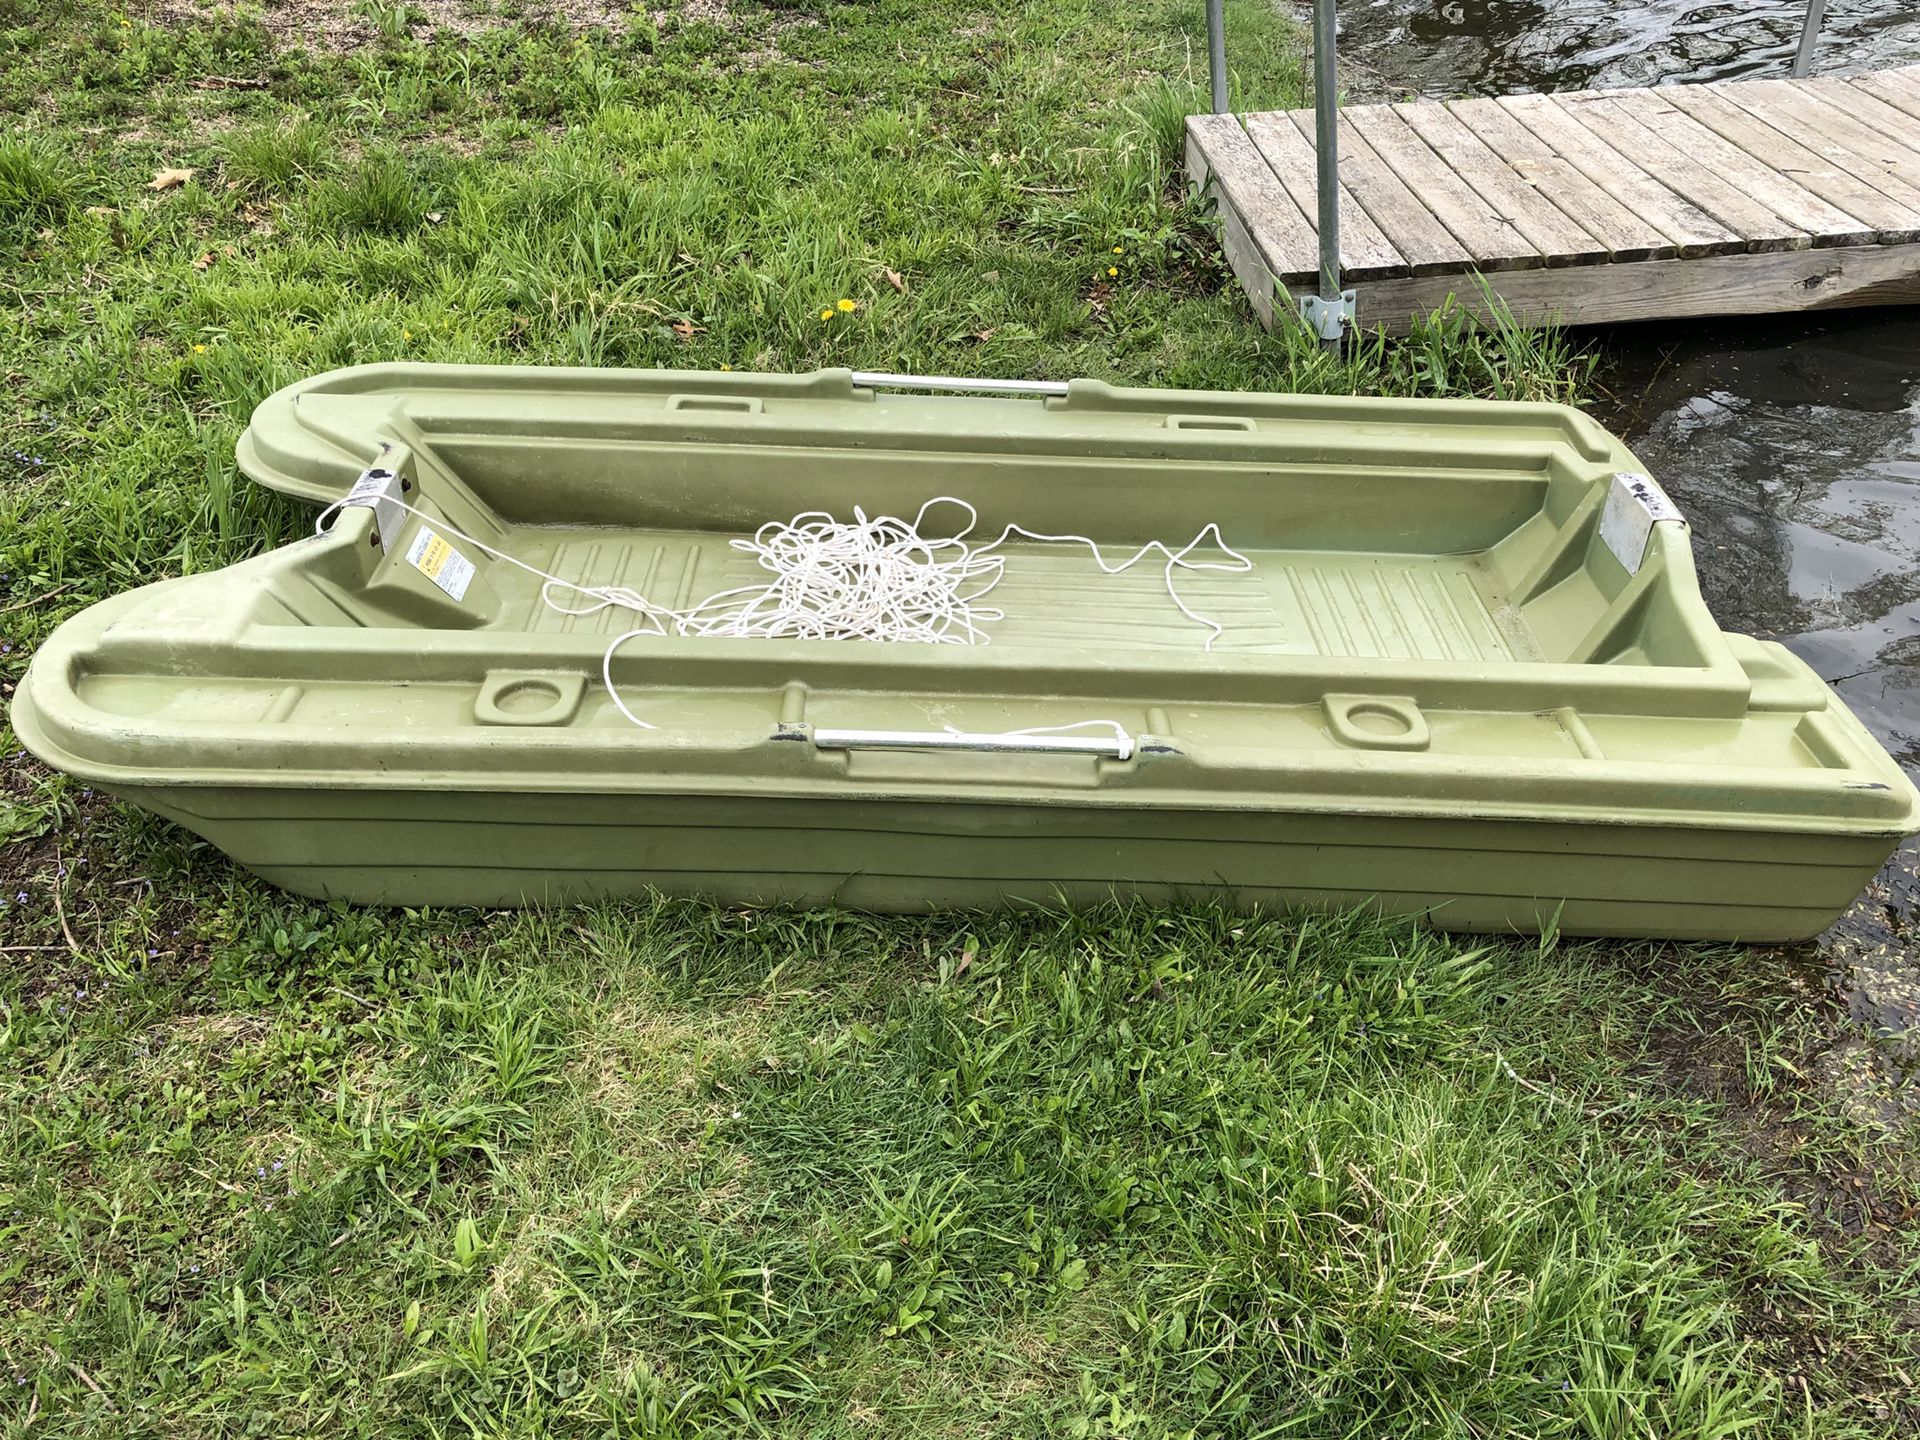 Bass Hunter Boat for Sale in Antioch, IL - OfferUp